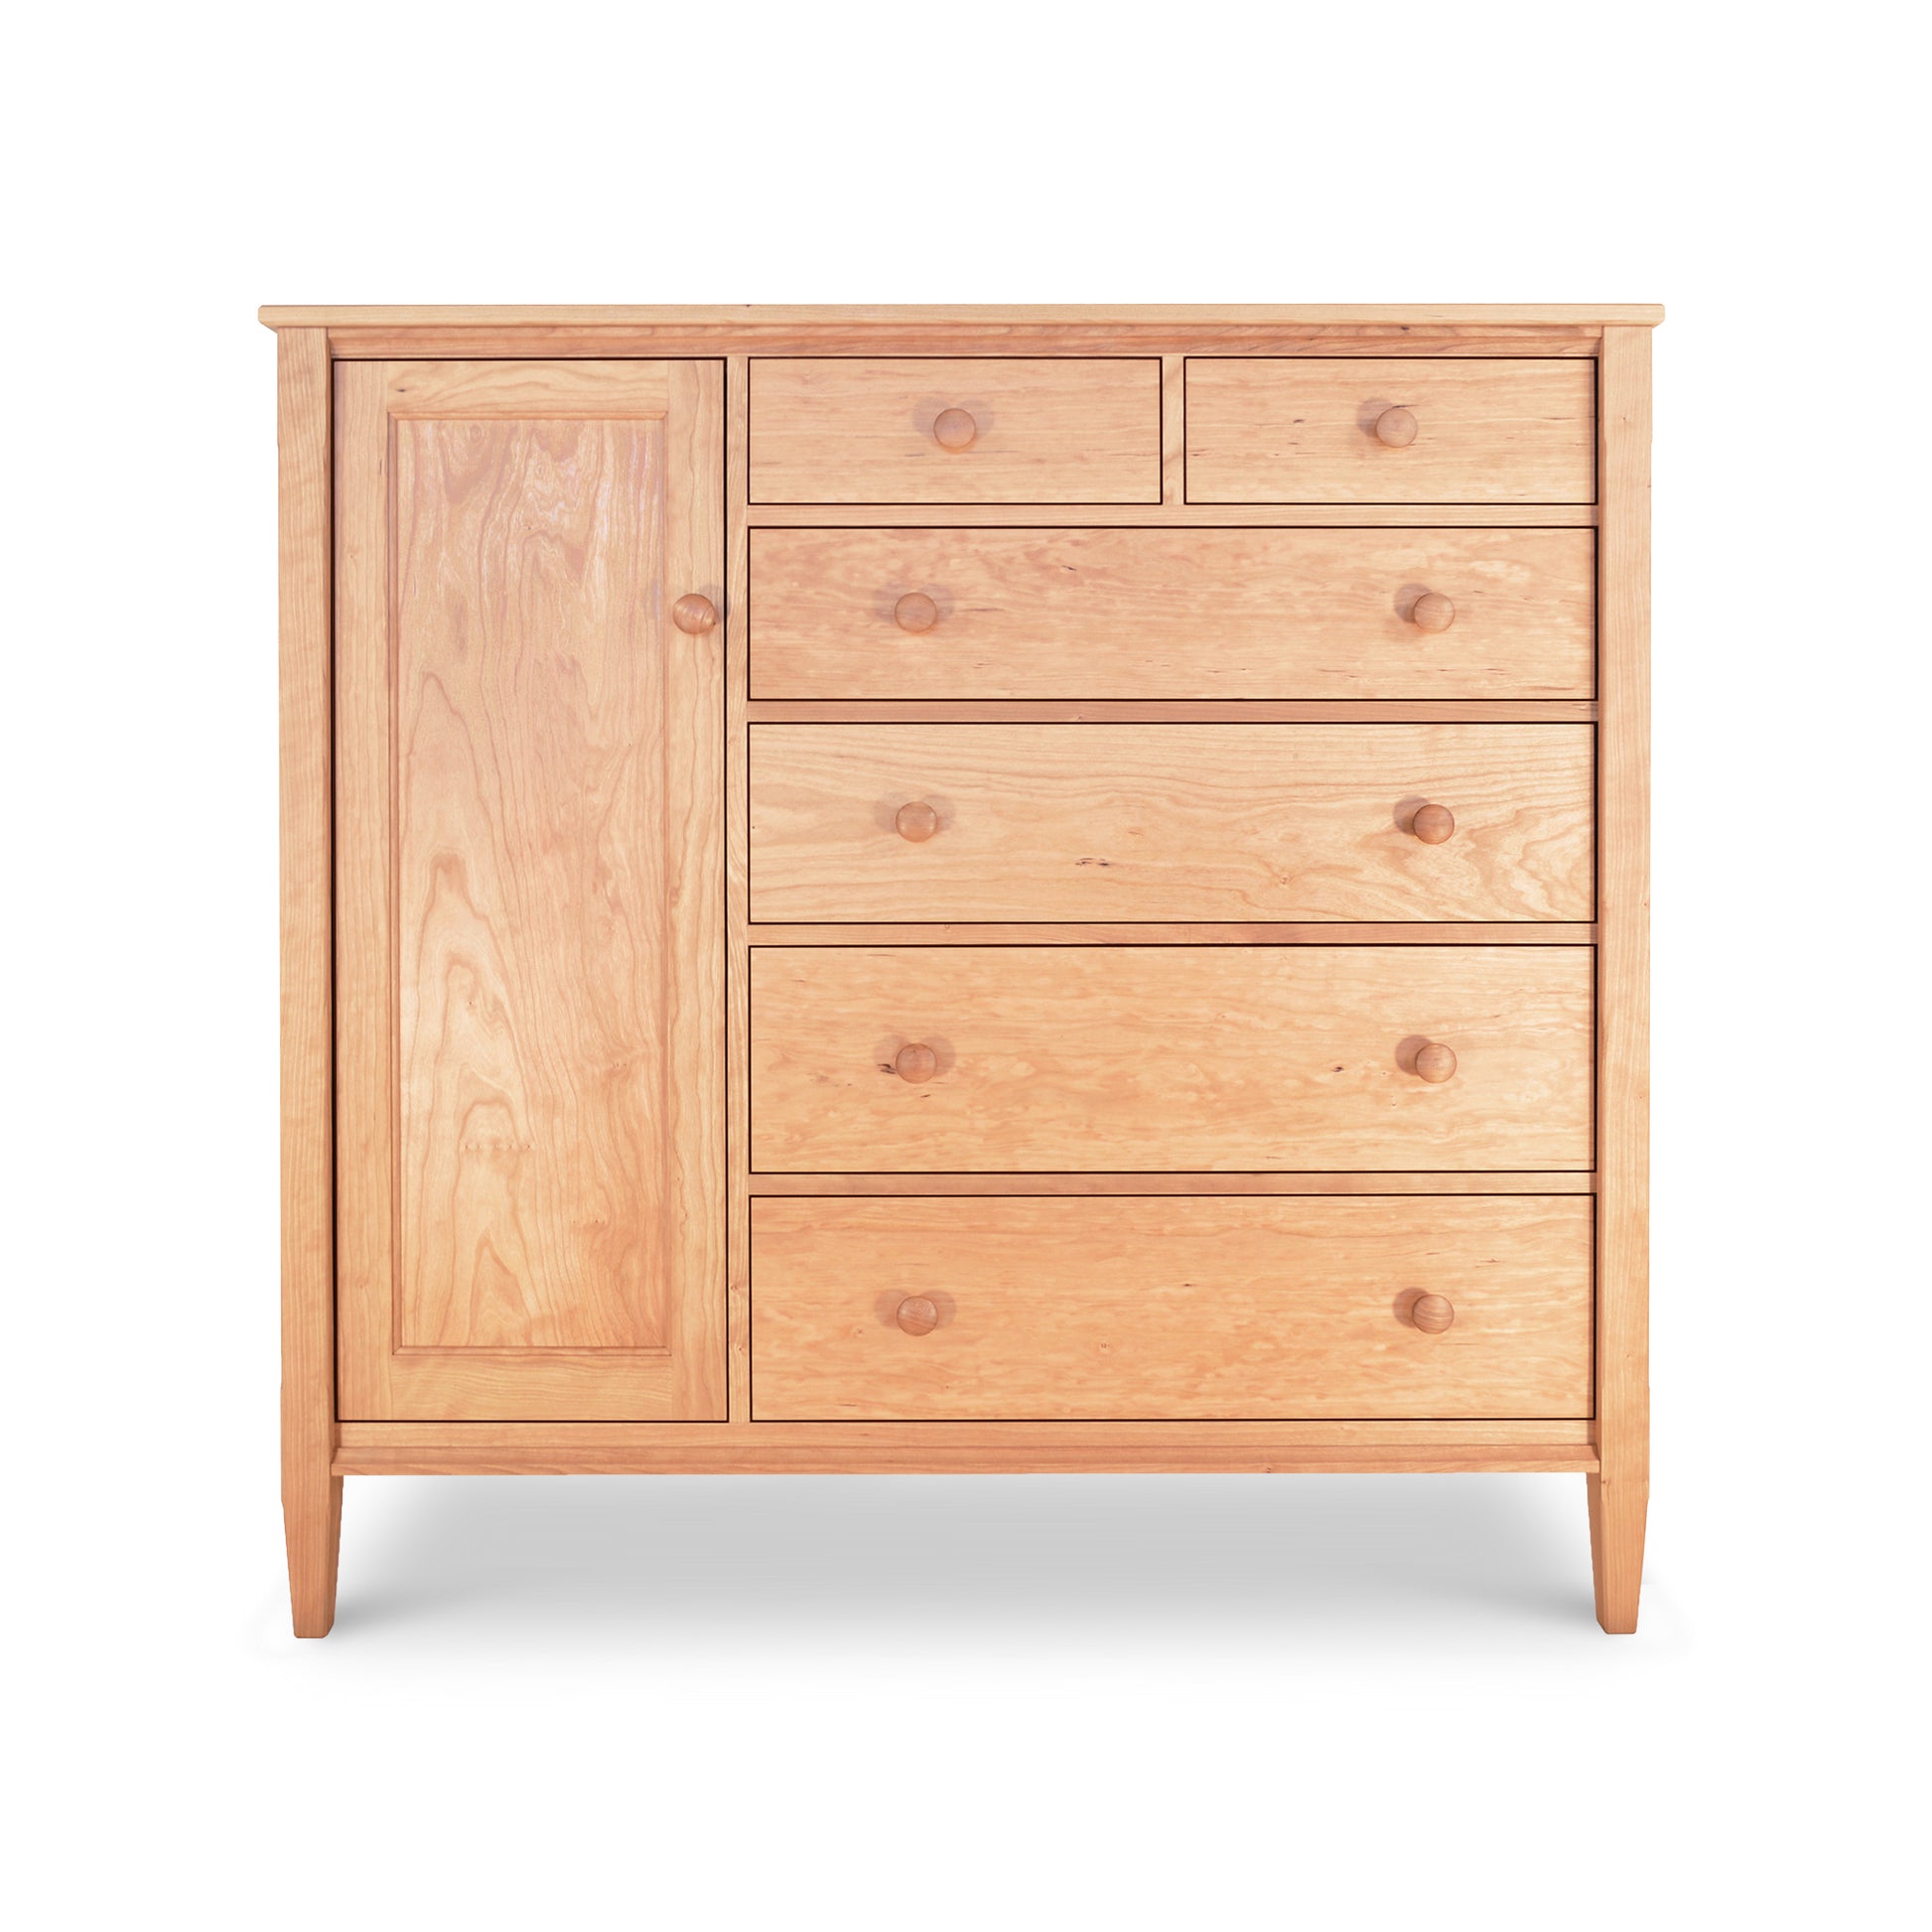 A Vermont Shaker Gent's Chest by Maple Corner Woodworks with one tall cabinet door on the left and five drawers of varying sizes on the right, all with round knobs, against a white background.